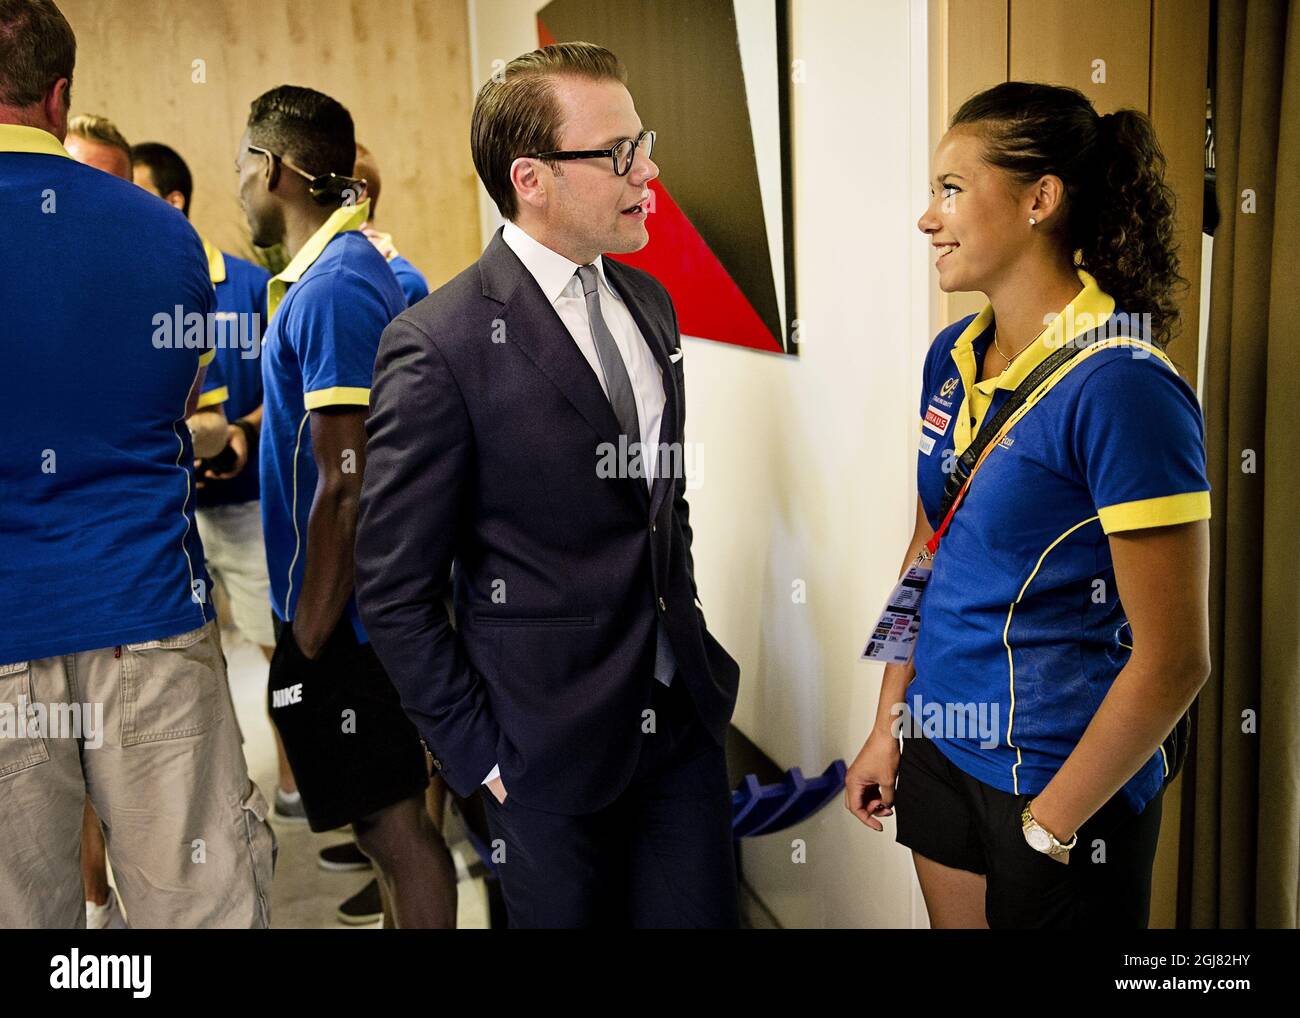 MOSKVA 2013-08-14 Prince Daniel is seen with pole vaulter Angelica Bengtsson during a reception for the Swedish athletes at the Swedish Embassy in Moscow, Russia, August 14, 2013. Foto: Erik Martensson / SCANPIX / Kod 10400  Stock Photo